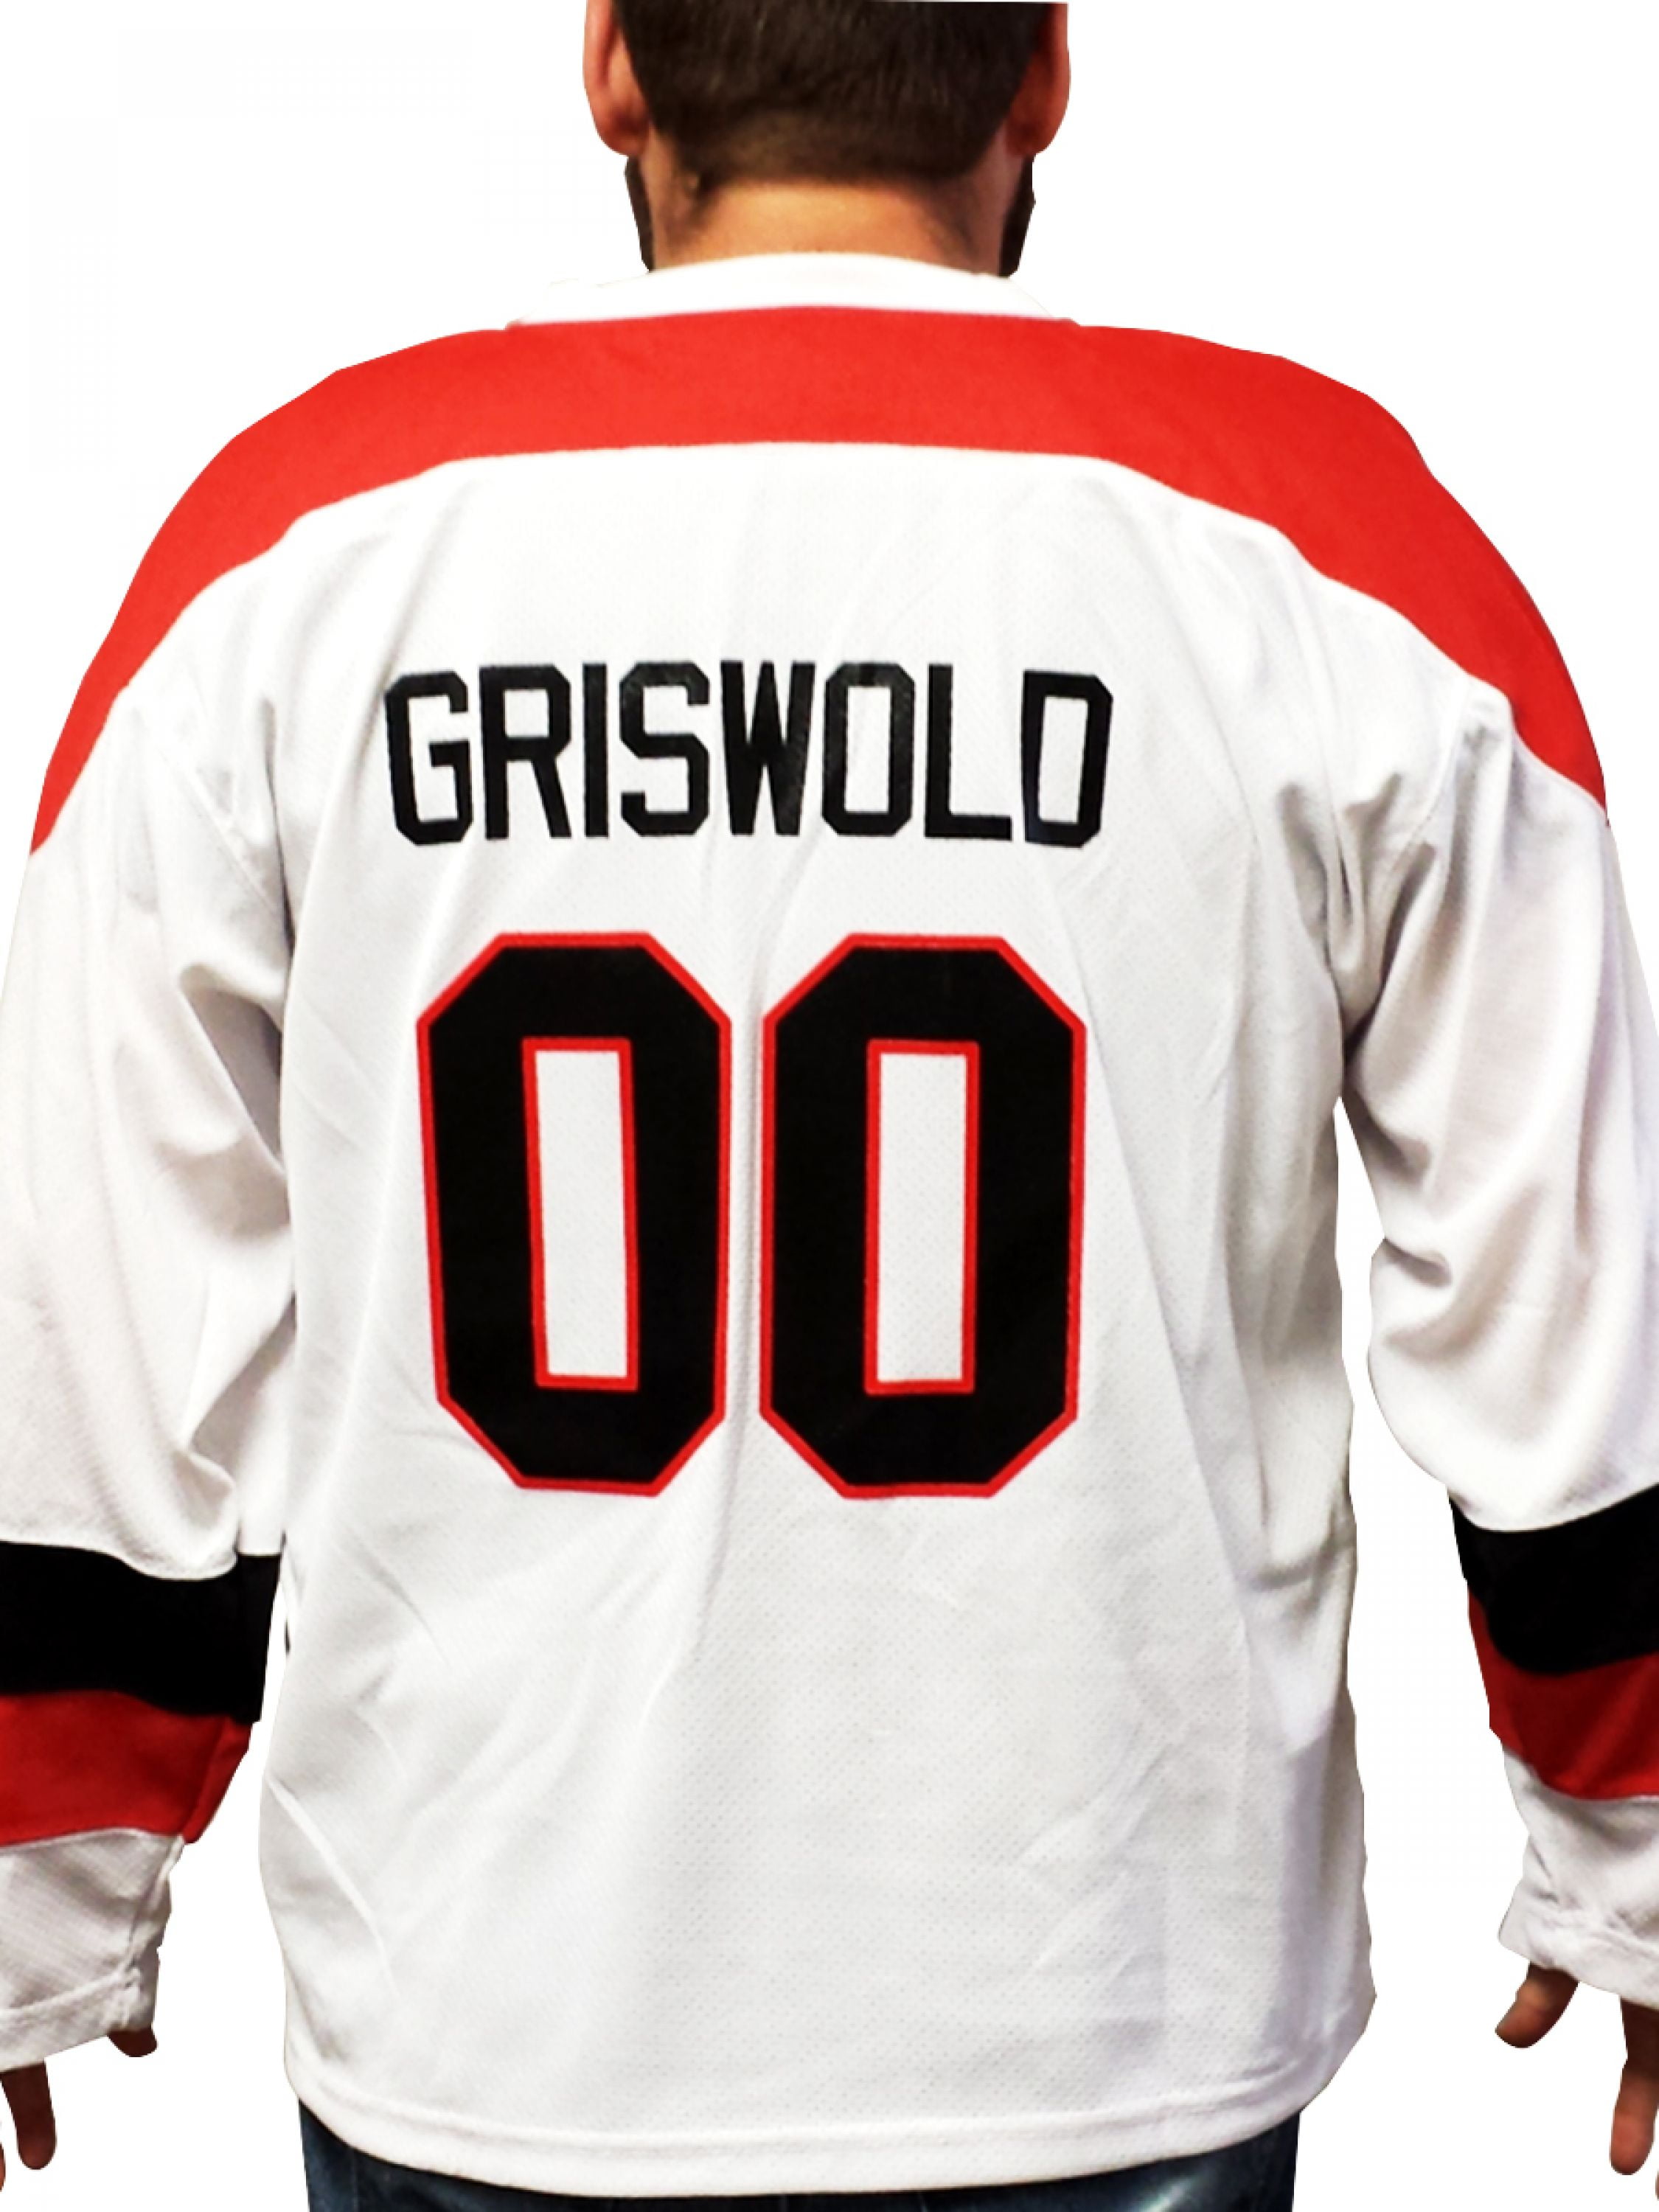 Mens USA Clark Griswold 00 Christmas Vacation ICE Movie Hockey Jersey Stitched S-3XL